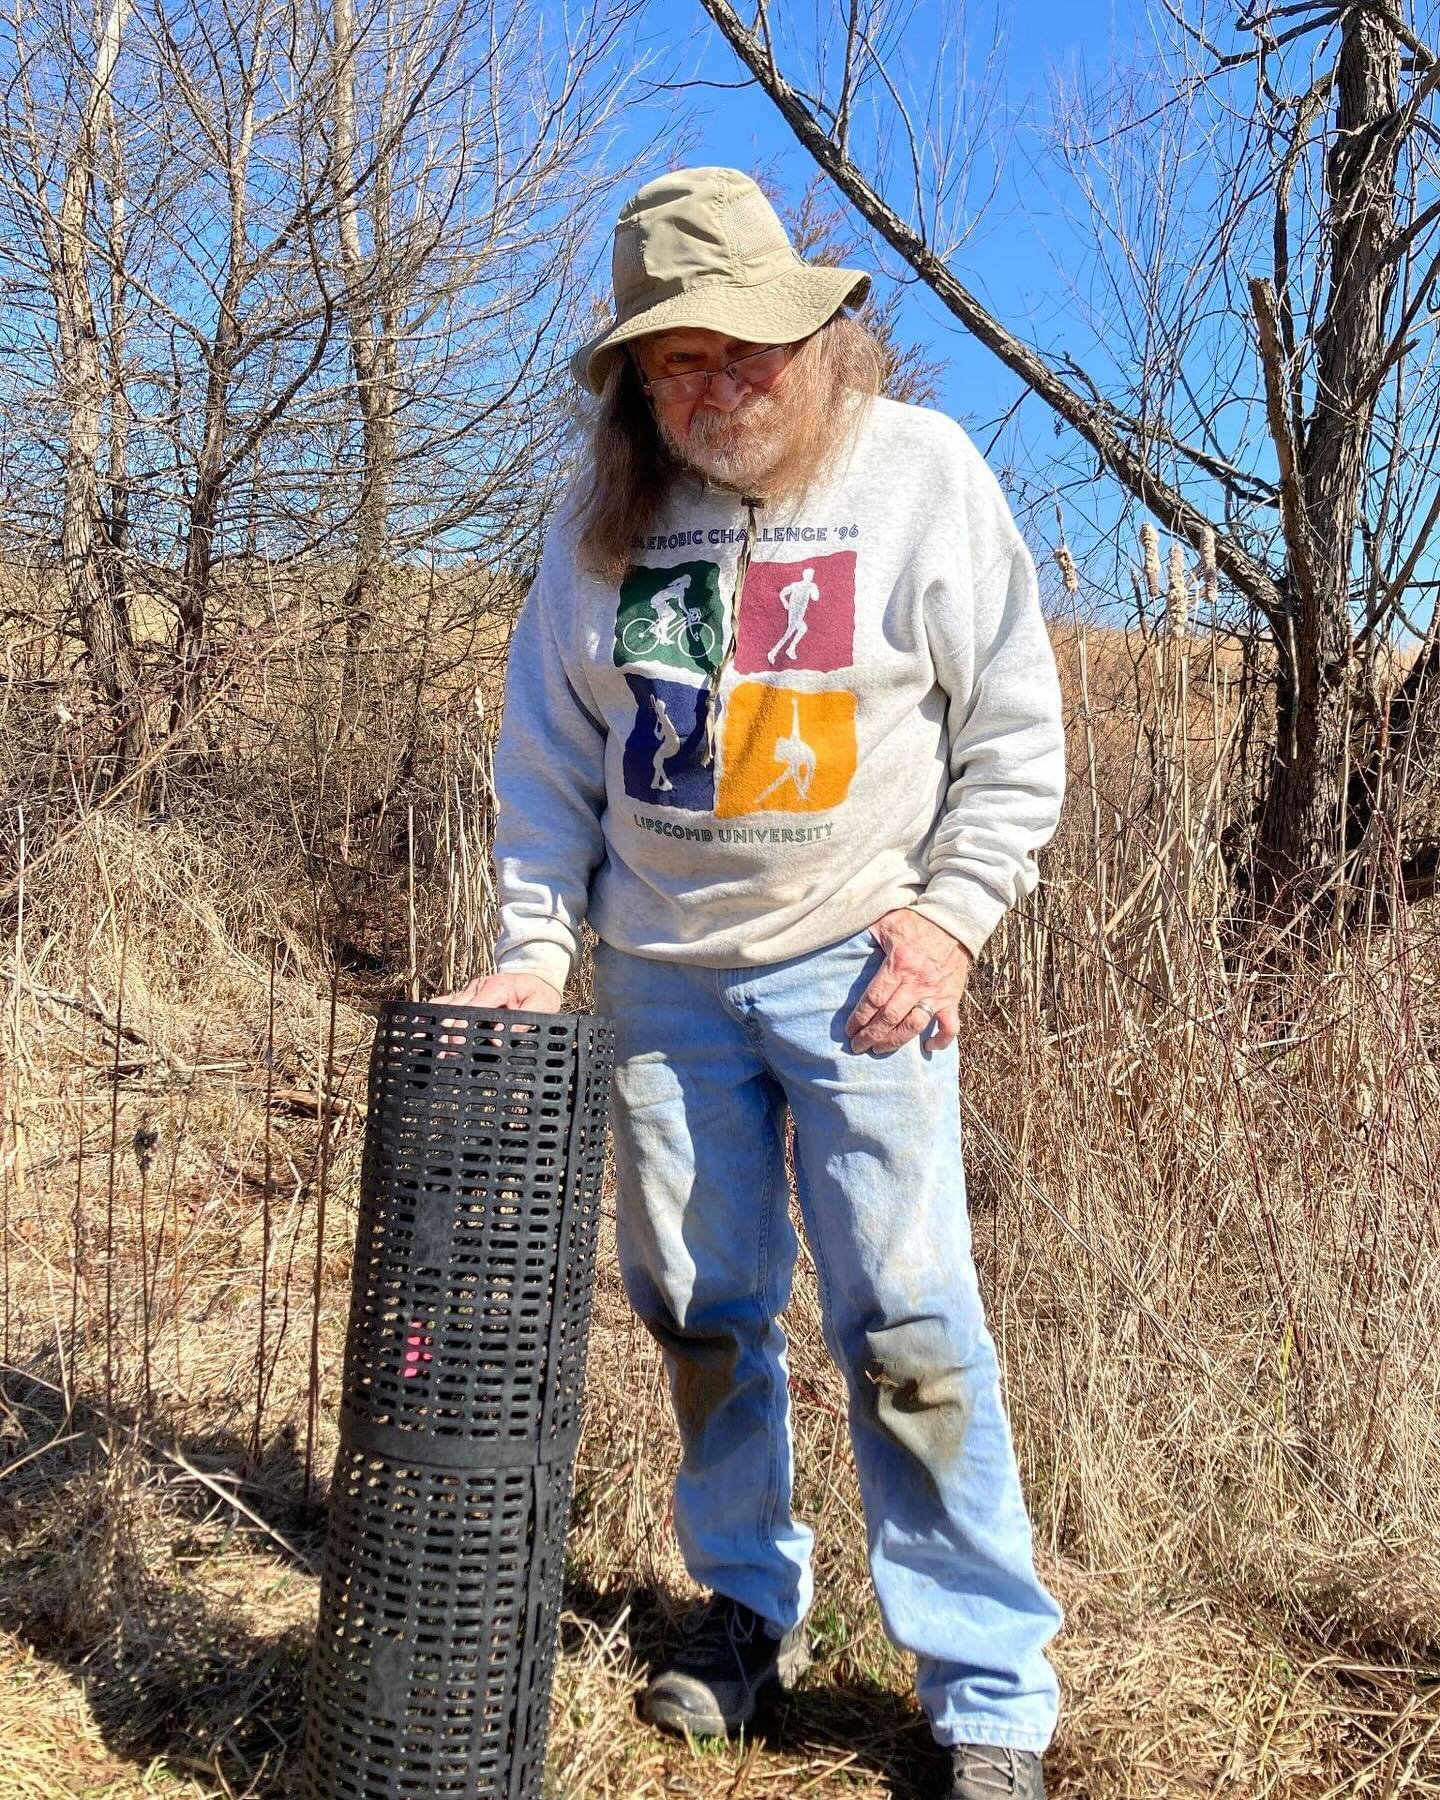 Paul has volunteered with Friends of Mill Ridge Park for ~two years and &gt;130 hours to steward the land and community at the park. 

He regularly volunteers to establish and maintain gardens, care for trees, build trails, grow pumpkins, remove inva